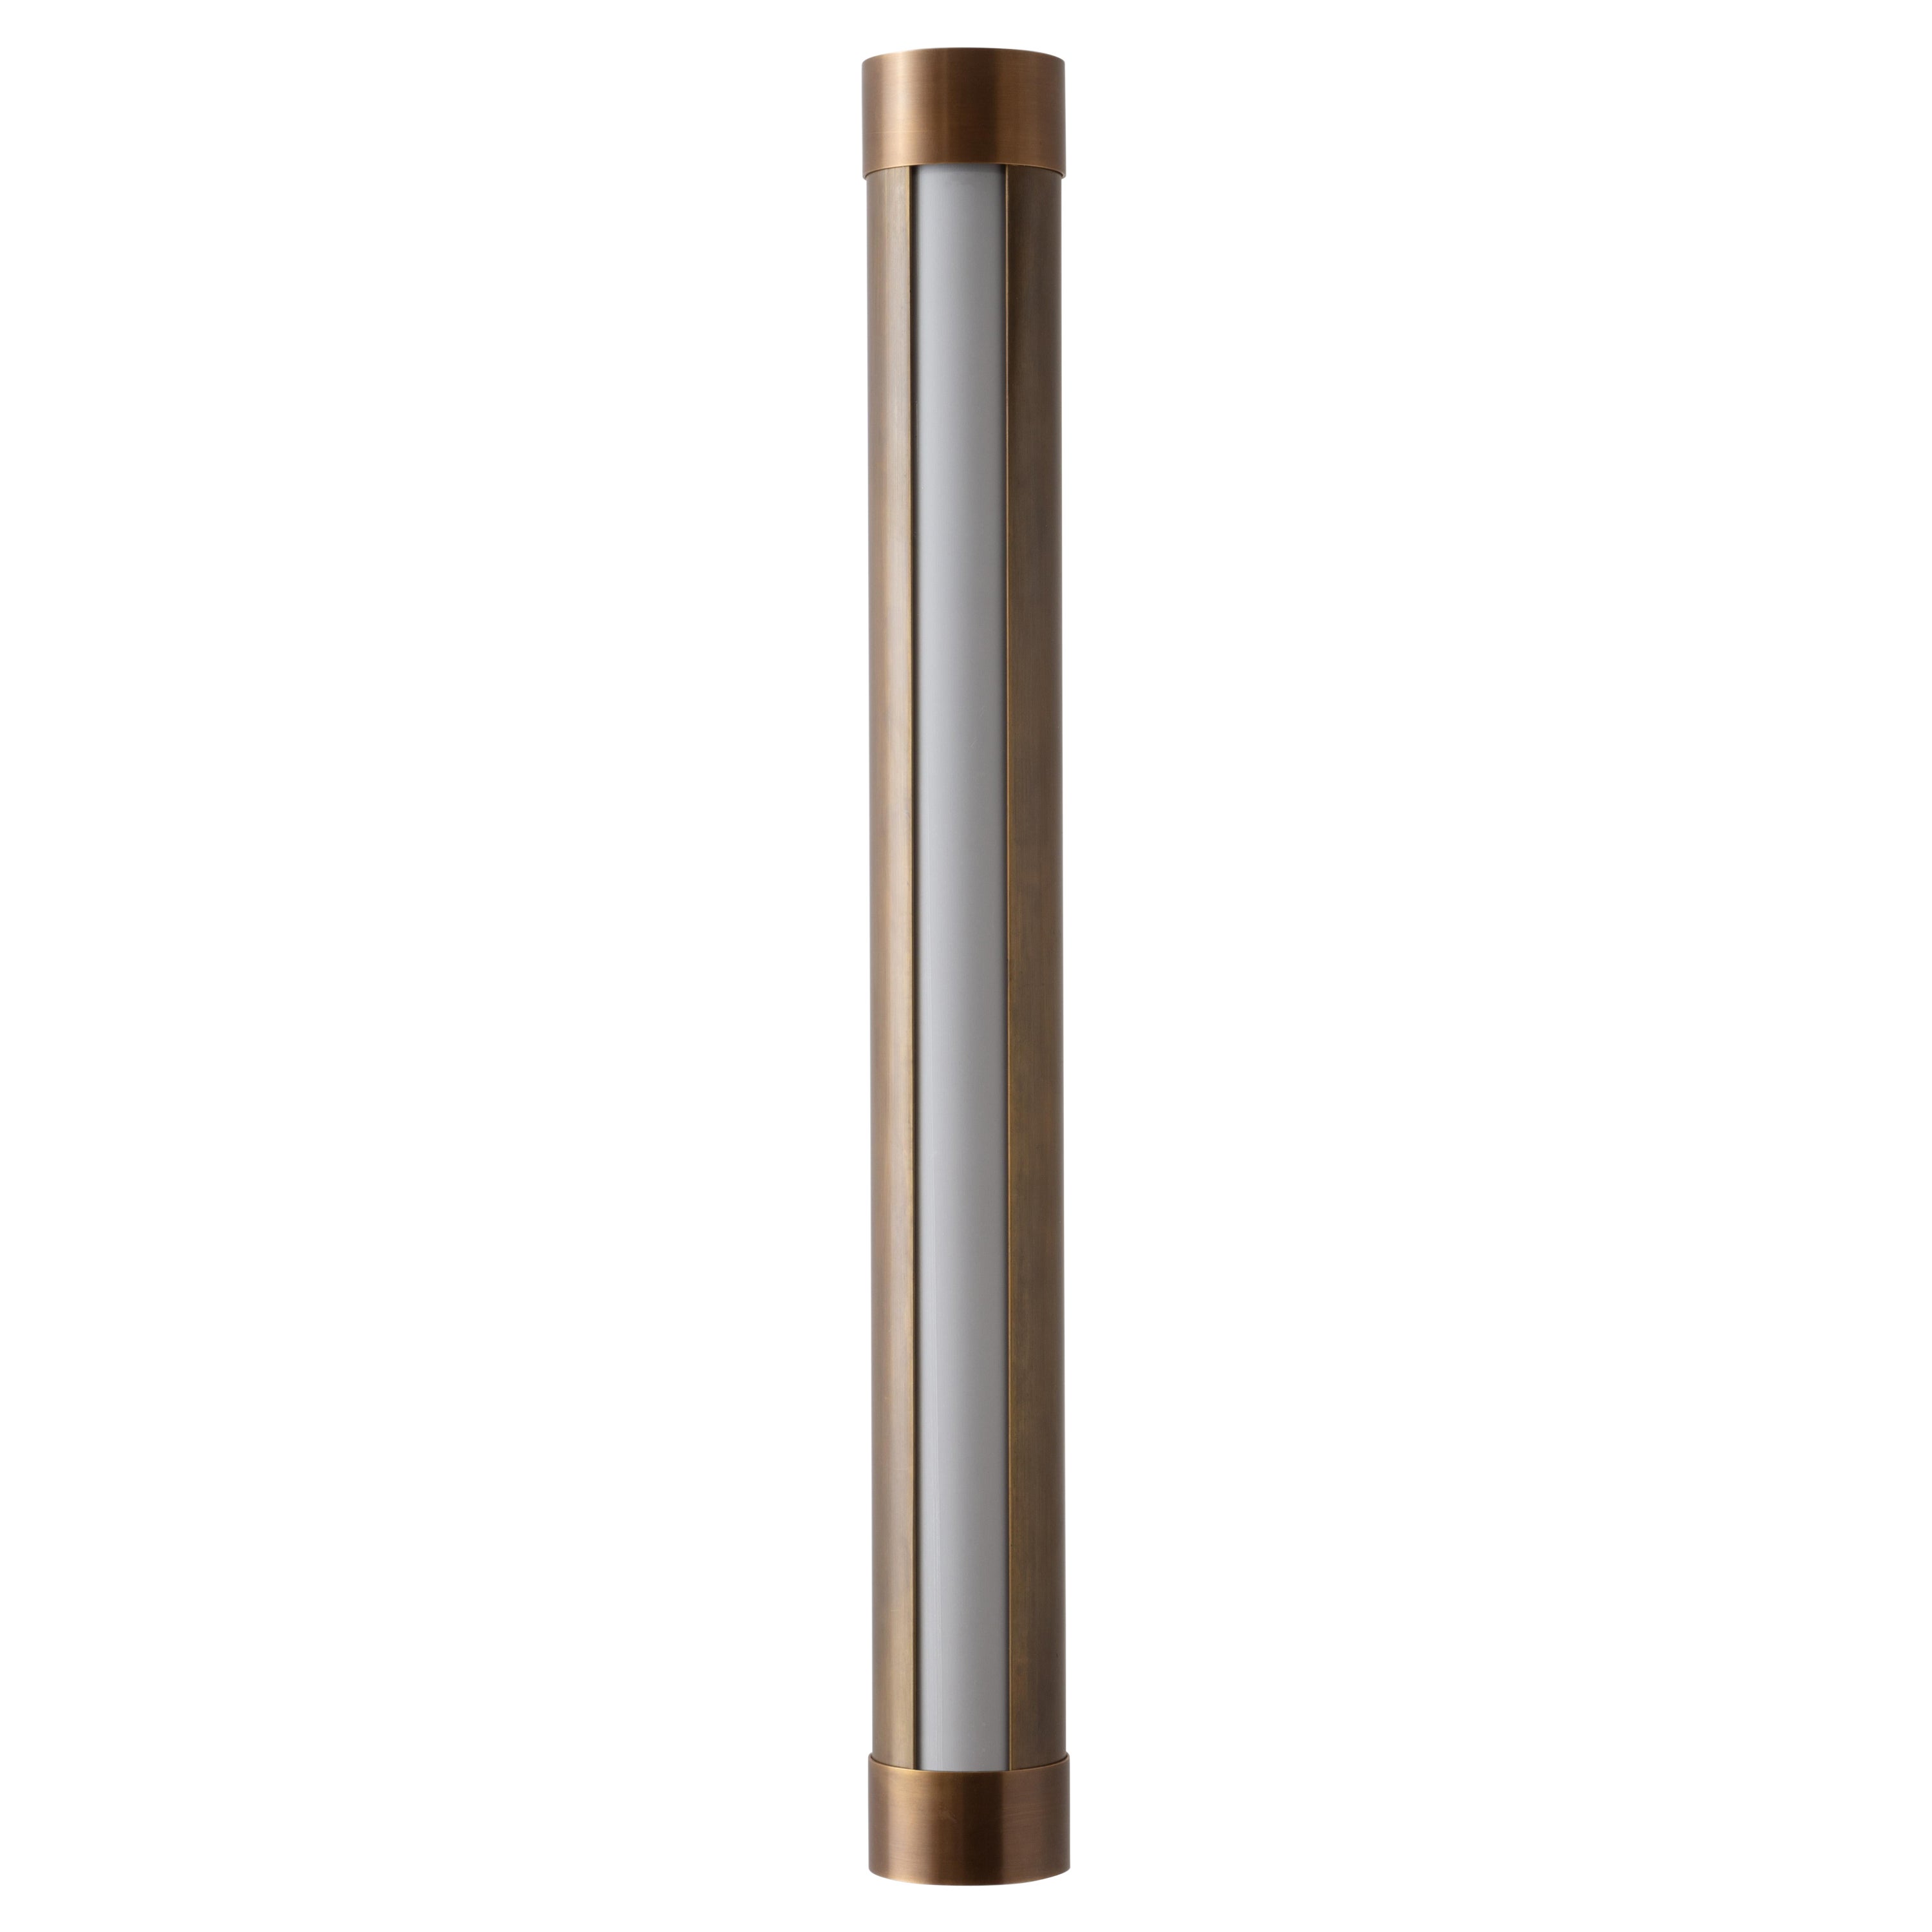 Im Angebot: To and Fro Sconce Contemporary Minimalist LED Linear Vanity Sconce, UL, Brown (Antique Brass)